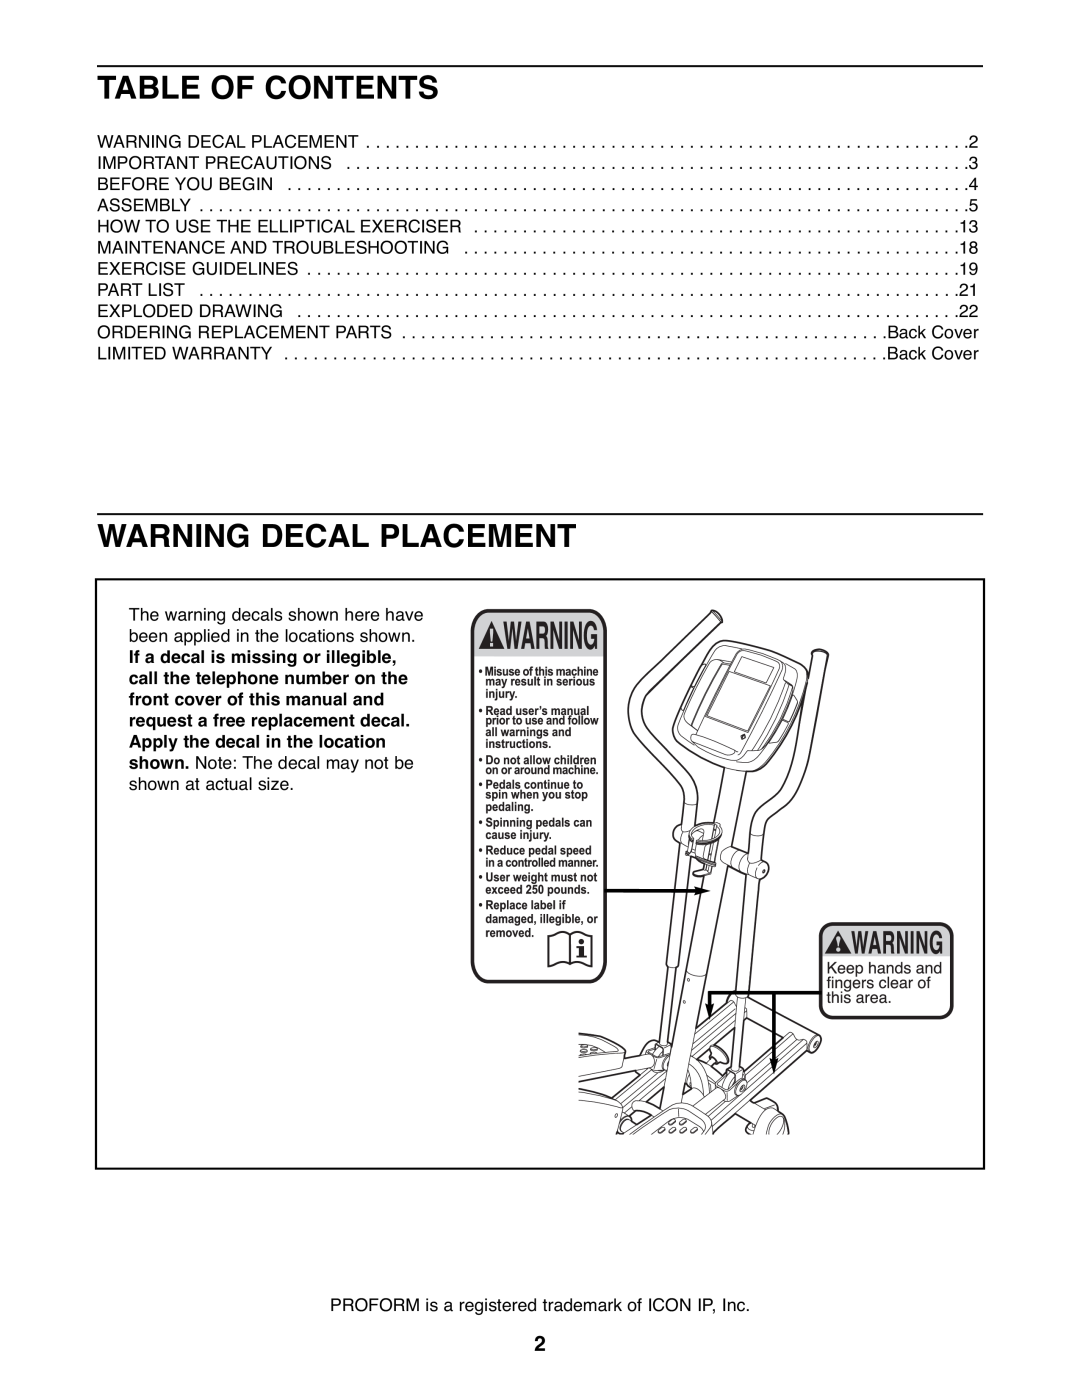 ProForm PFEL73207.0 Table Of Contents, Warning Decal Placement, PROFORM is a registered trademark of ICON IP, Inc 